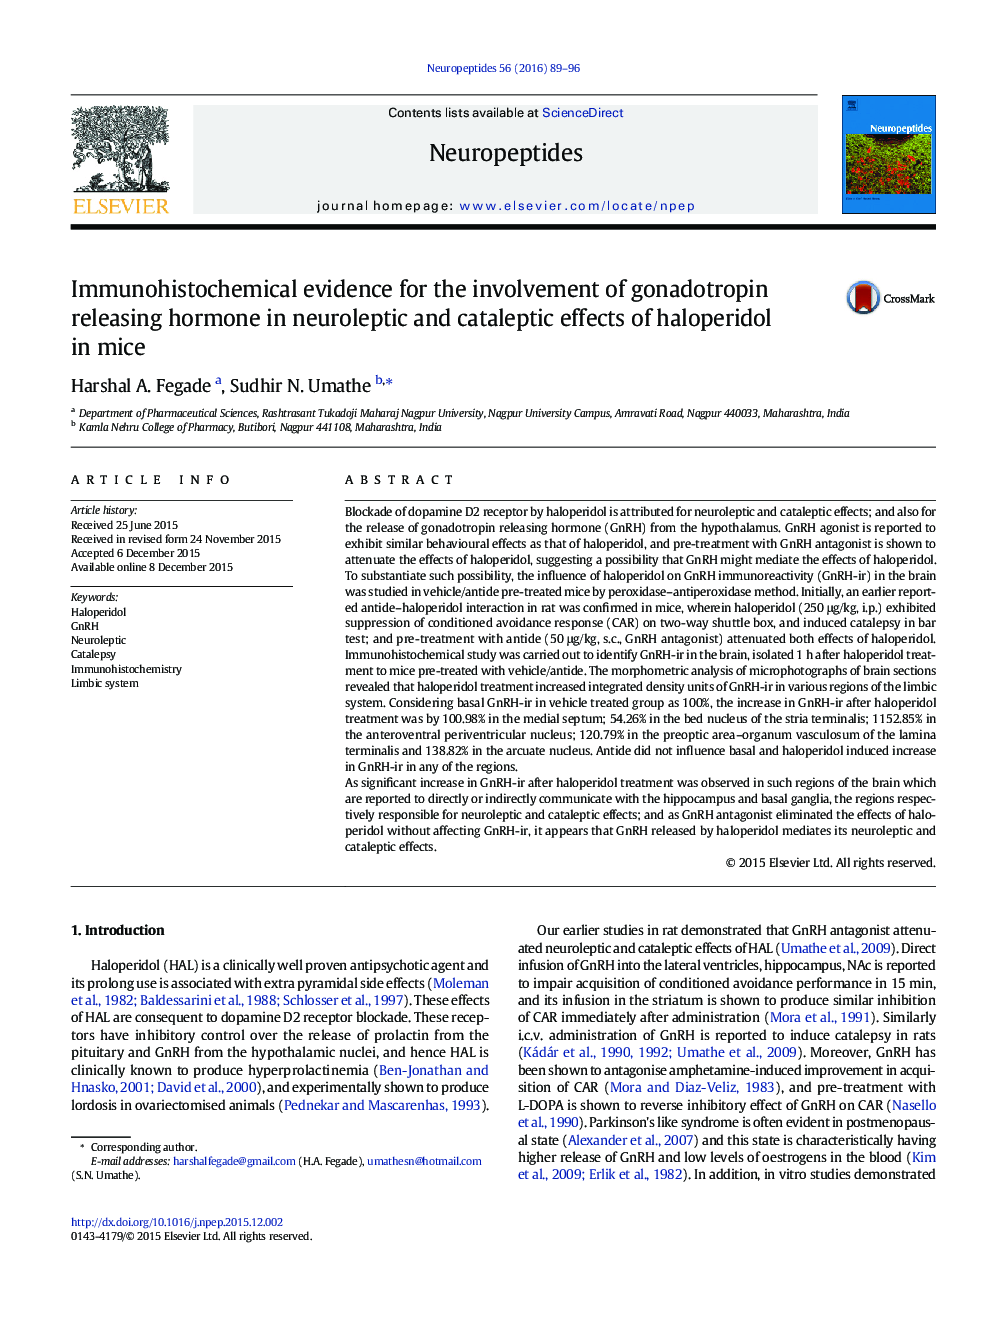 Immunohistochemical evidence for the involvement of gonadotropin releasing hormone in neuroleptic and cataleptic effects of haloperidol in mice